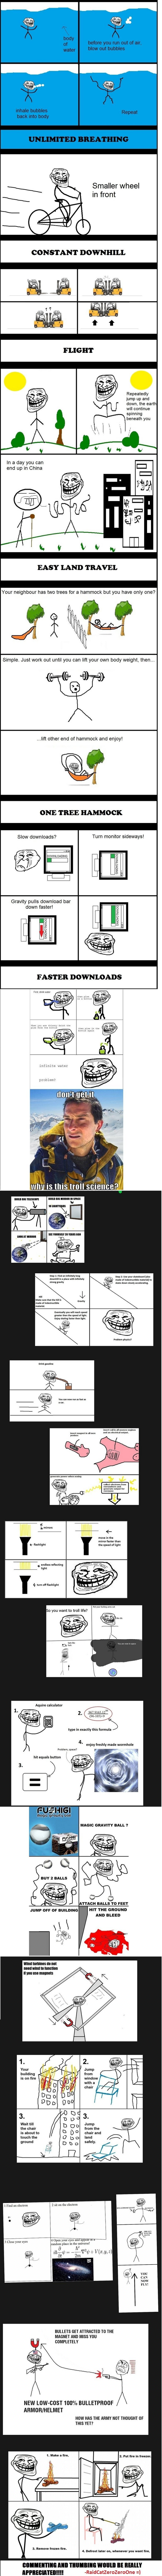 Troll physics comp. i love troll physics so i thought id upload this.. I have the undying urge to insert logic into every single one of these....